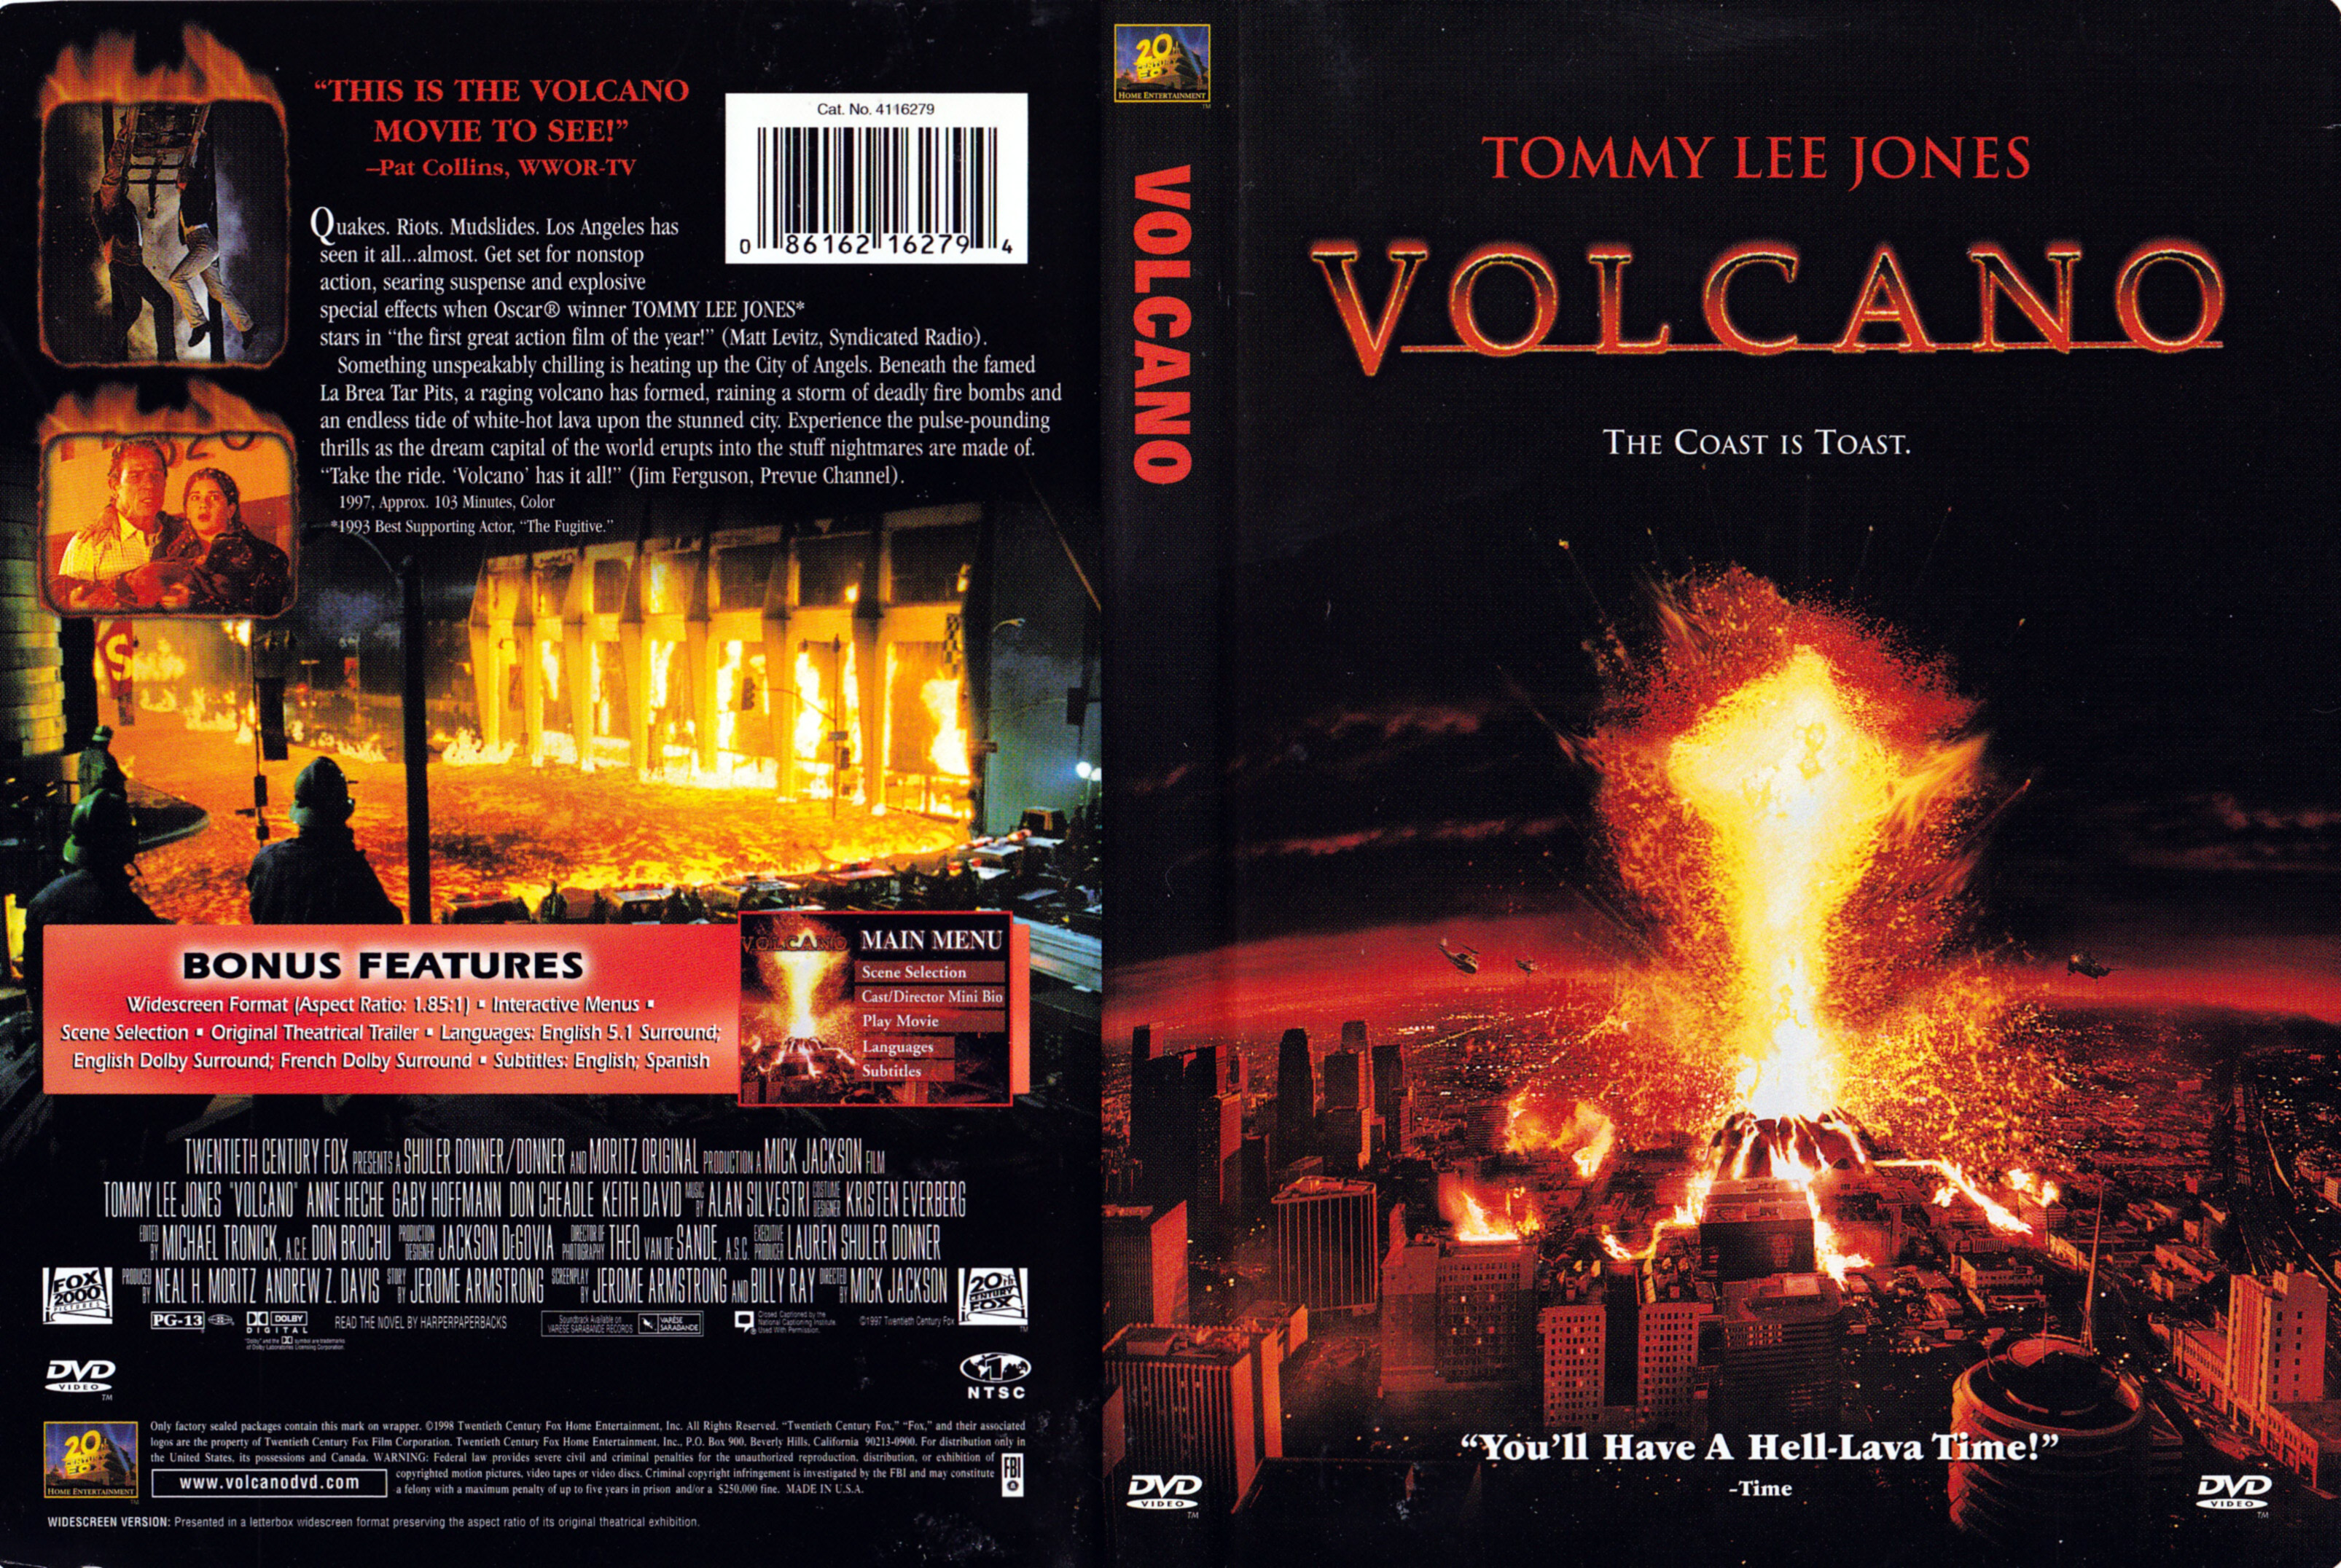 Jaquette DVD Volcano (Canadienne)